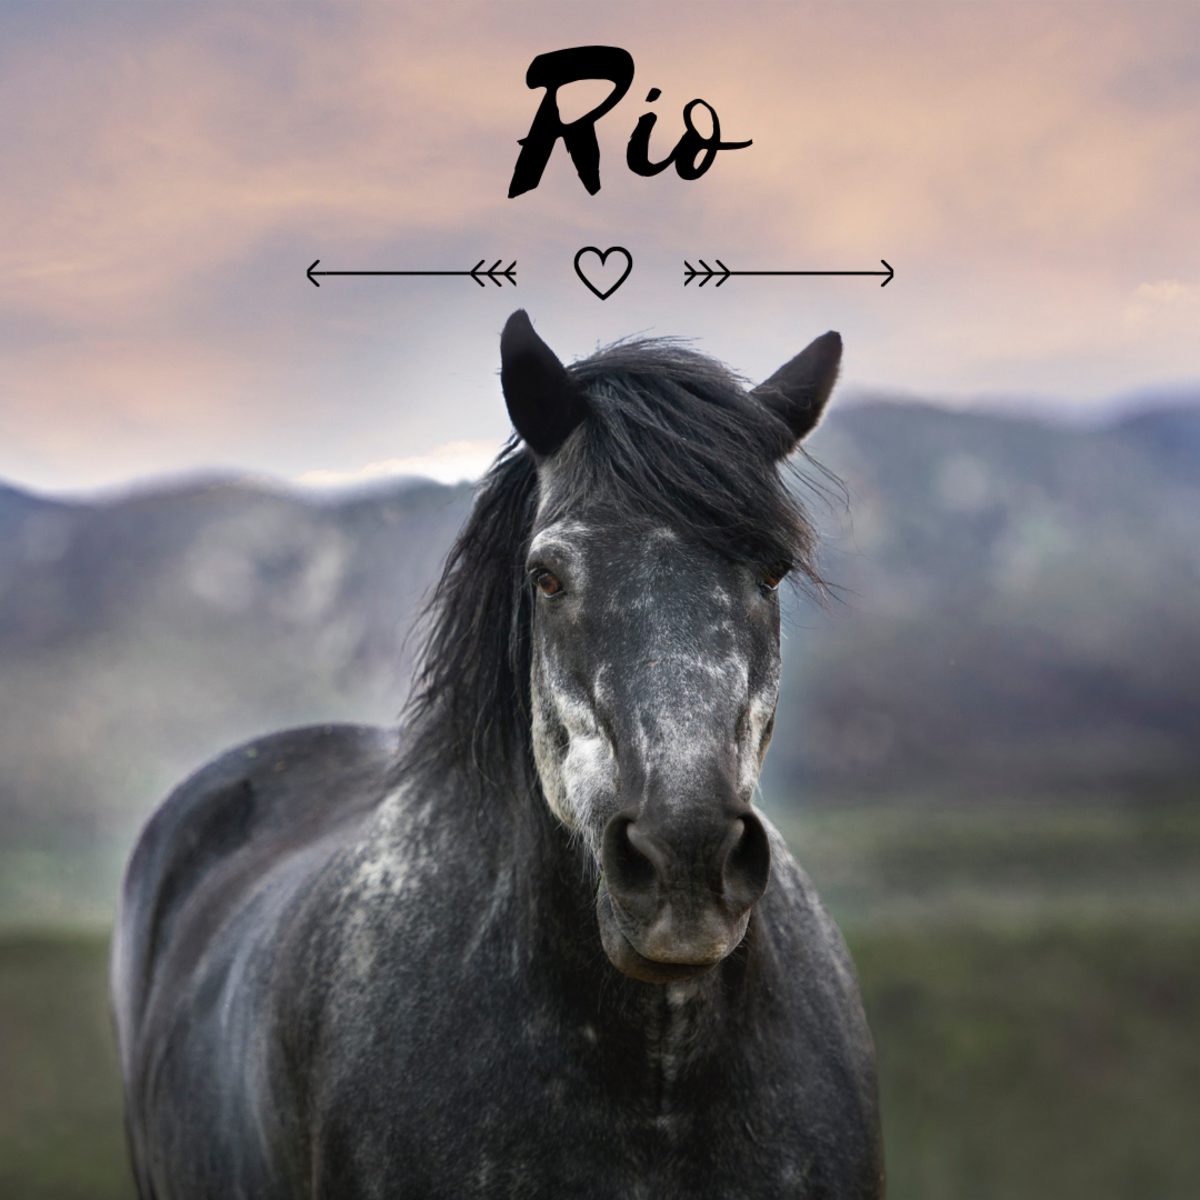 Is your horse a Rio?